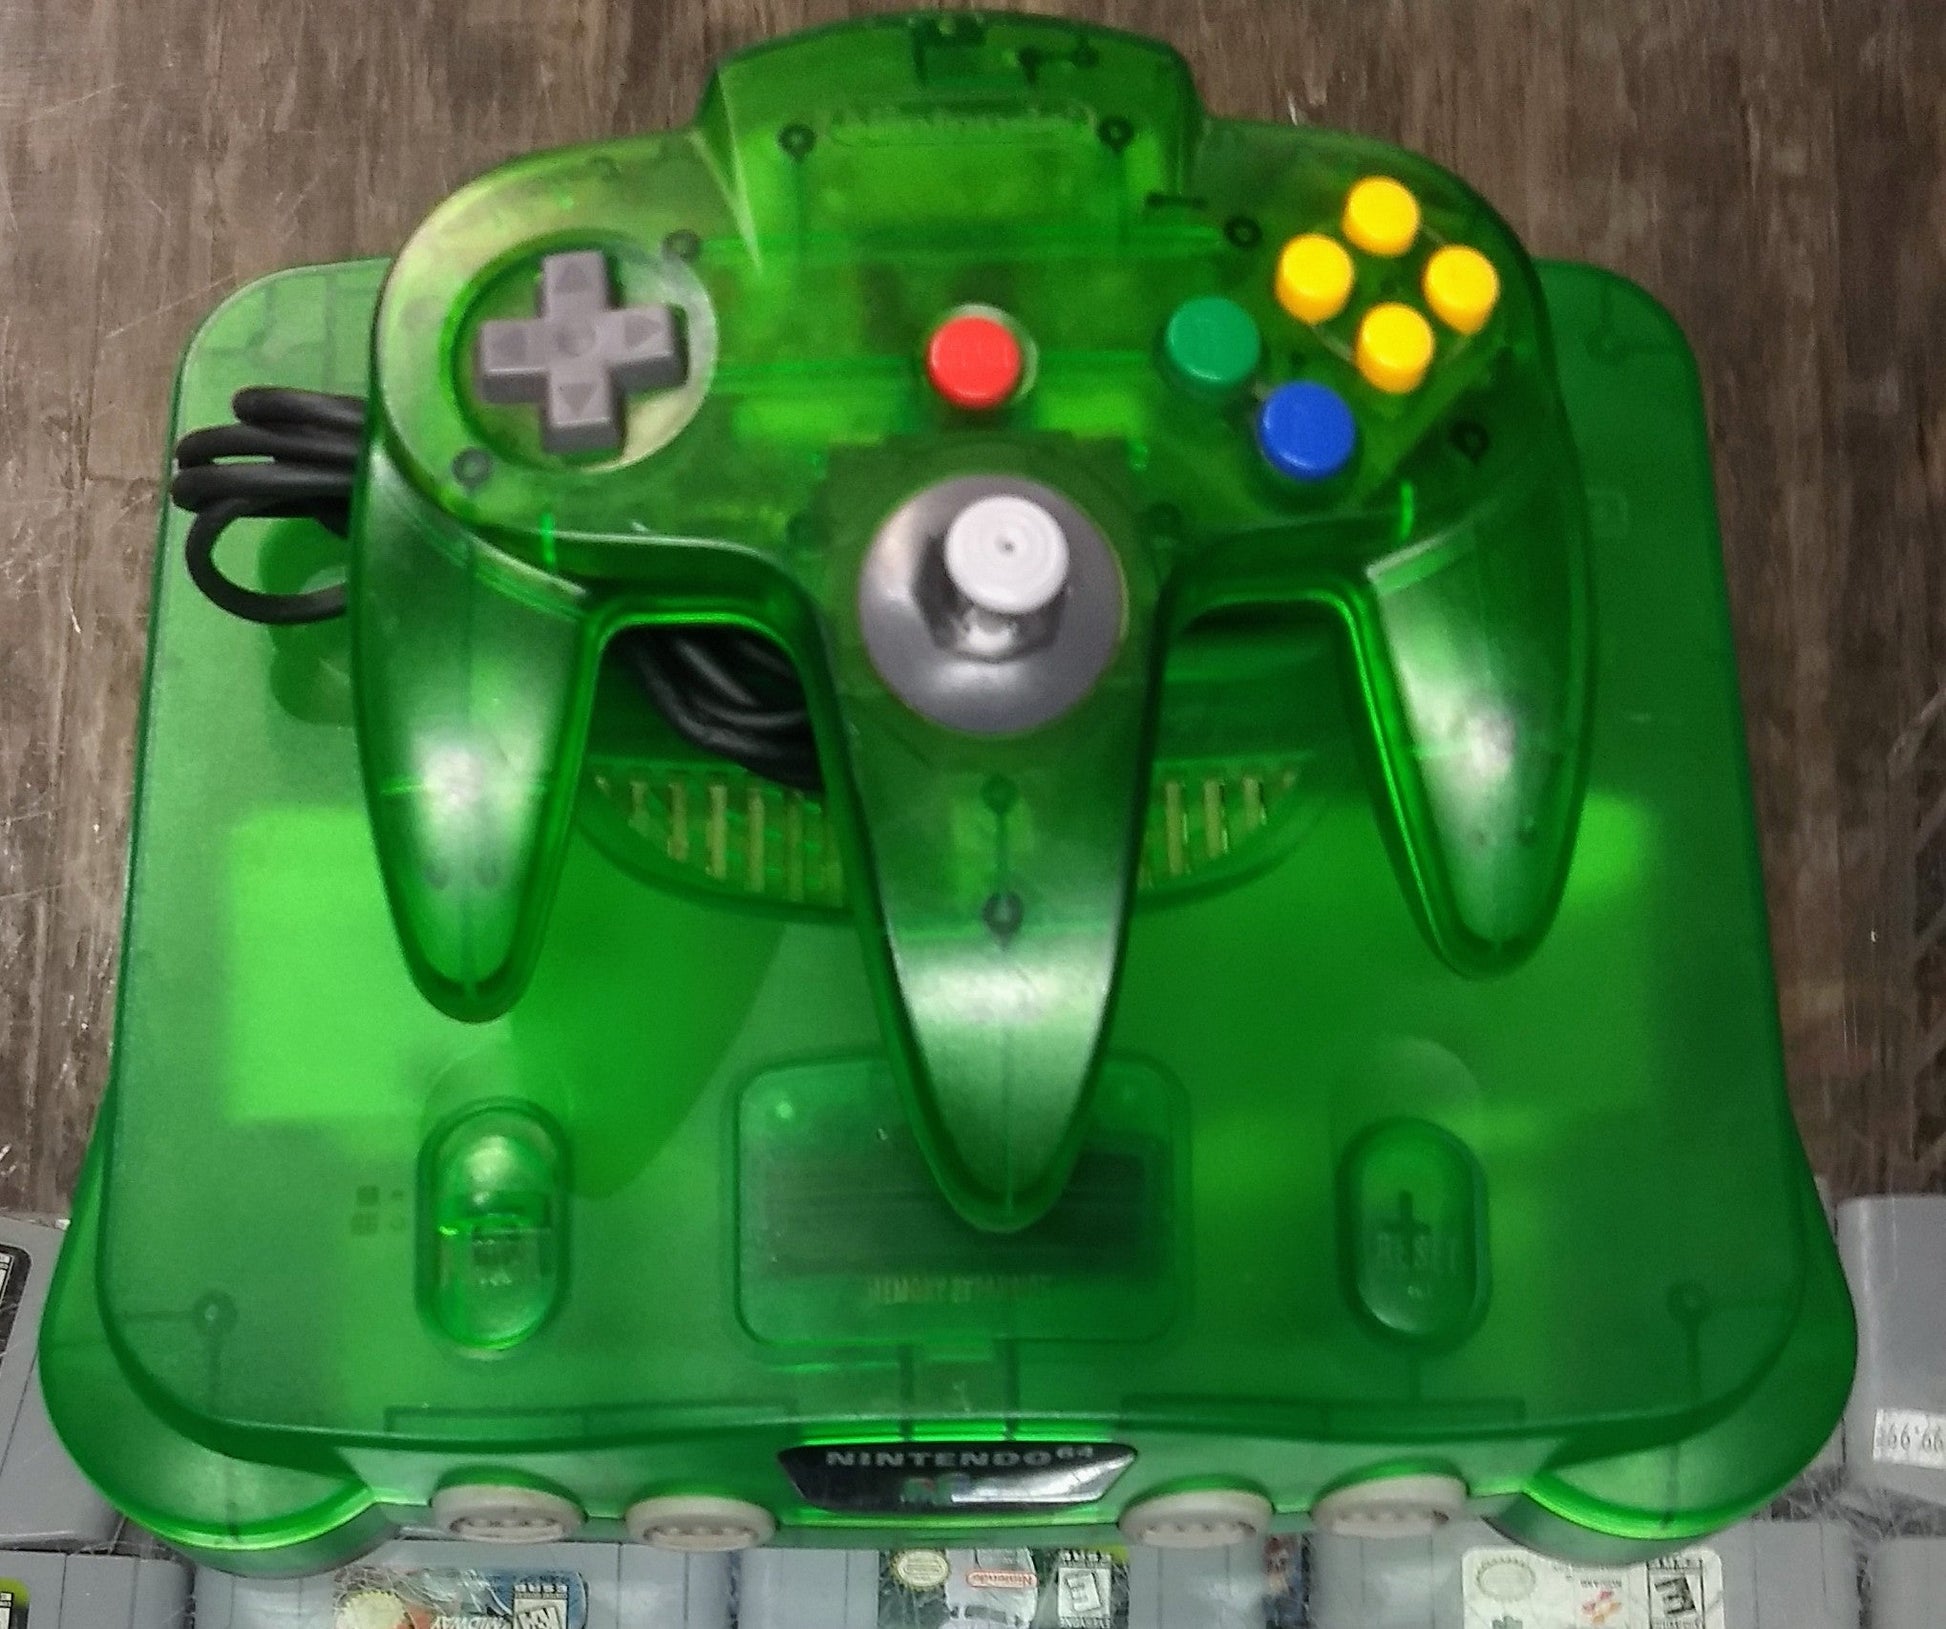 CONSOLE NINTENDO 64 (N64) FUNTASTIC JUNGLE GREEN SYSTEM - jeux video game-x